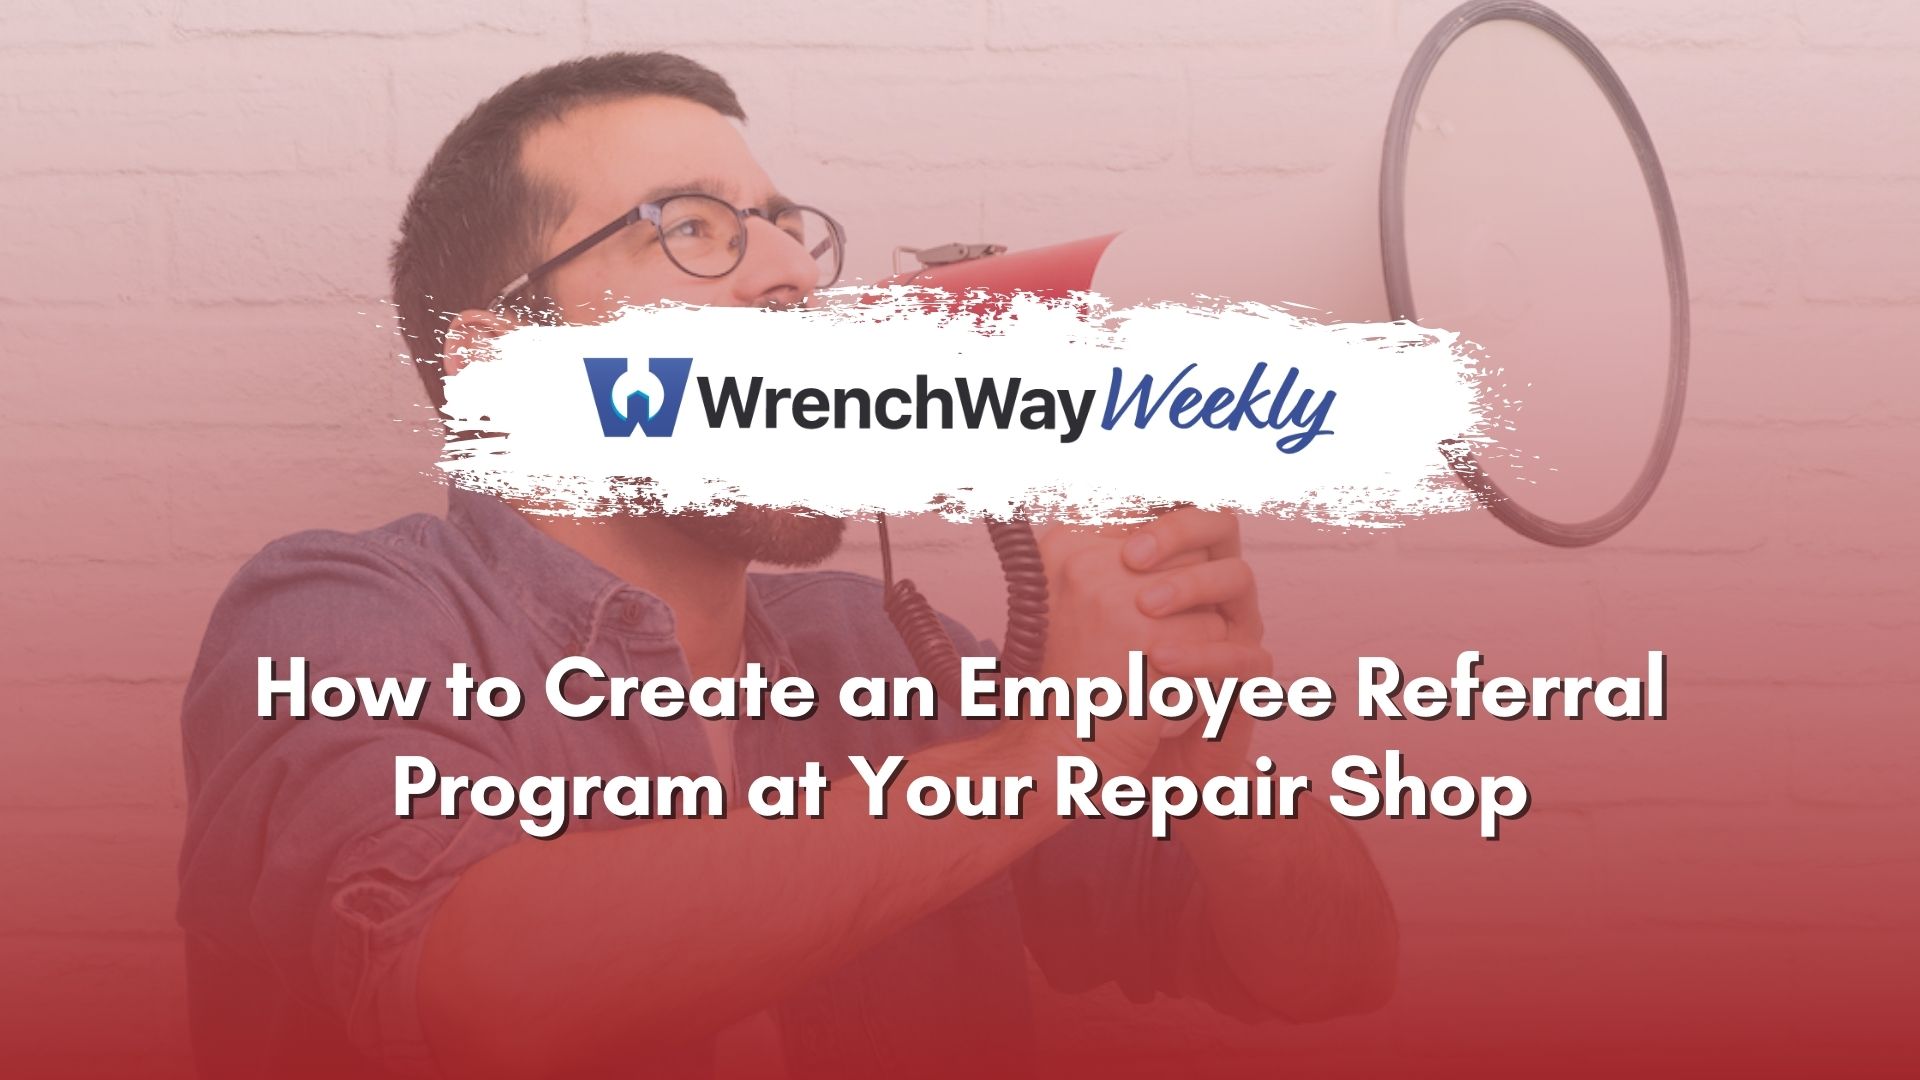 WrenchWay weekly on how to create an employee referral program at your repair shop